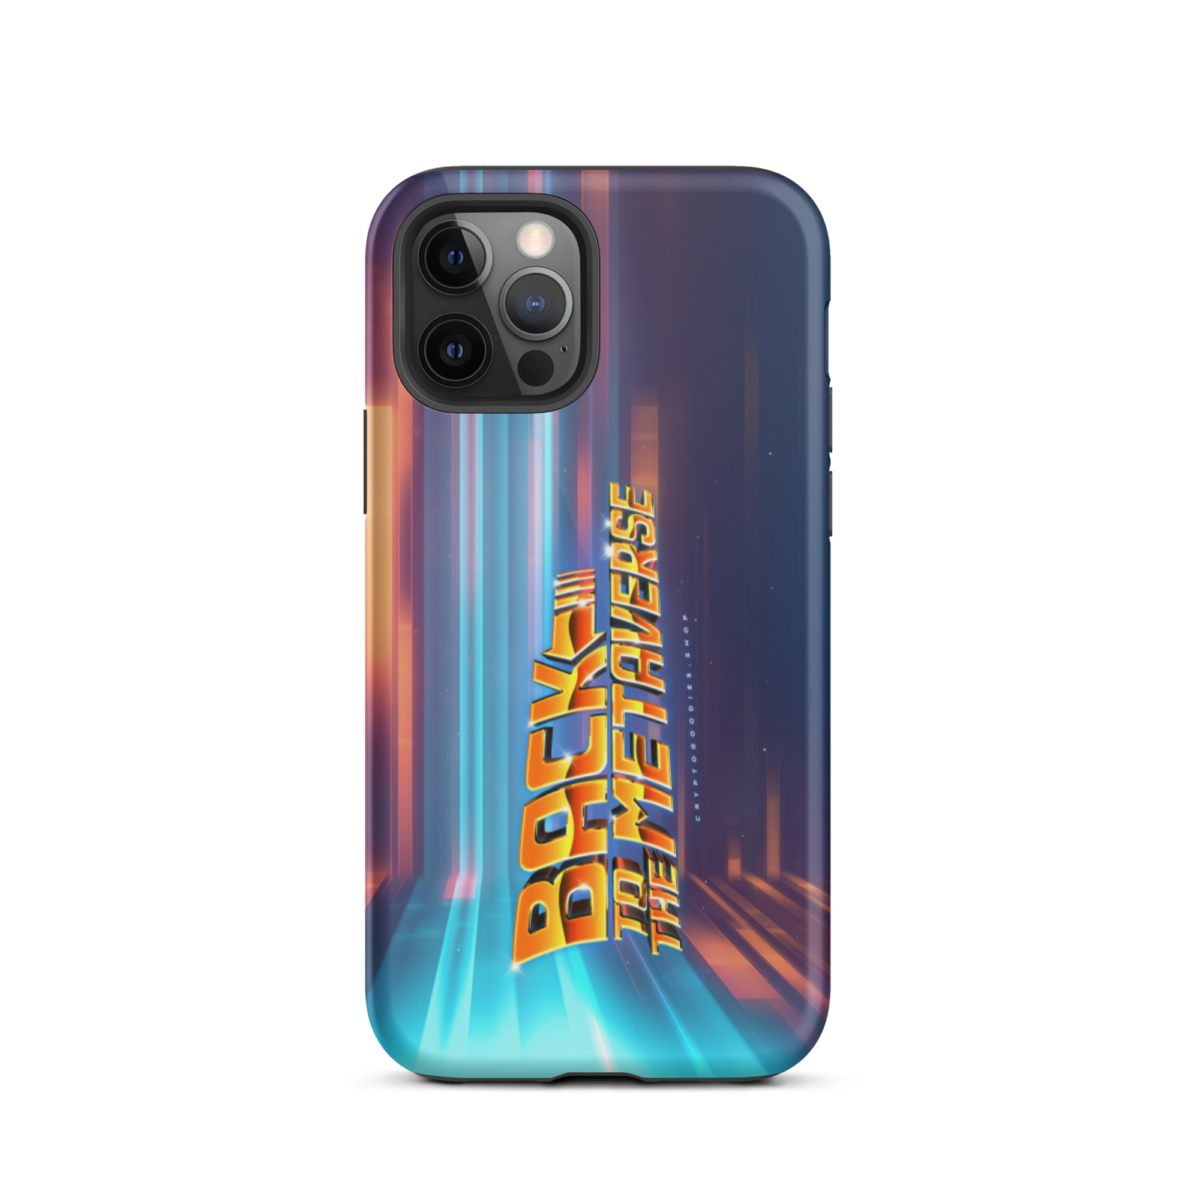 tough iphone case glossy iphone 12 pro front 6397c7ba28e7a - Back to the Metaverse Tough iPhone Case